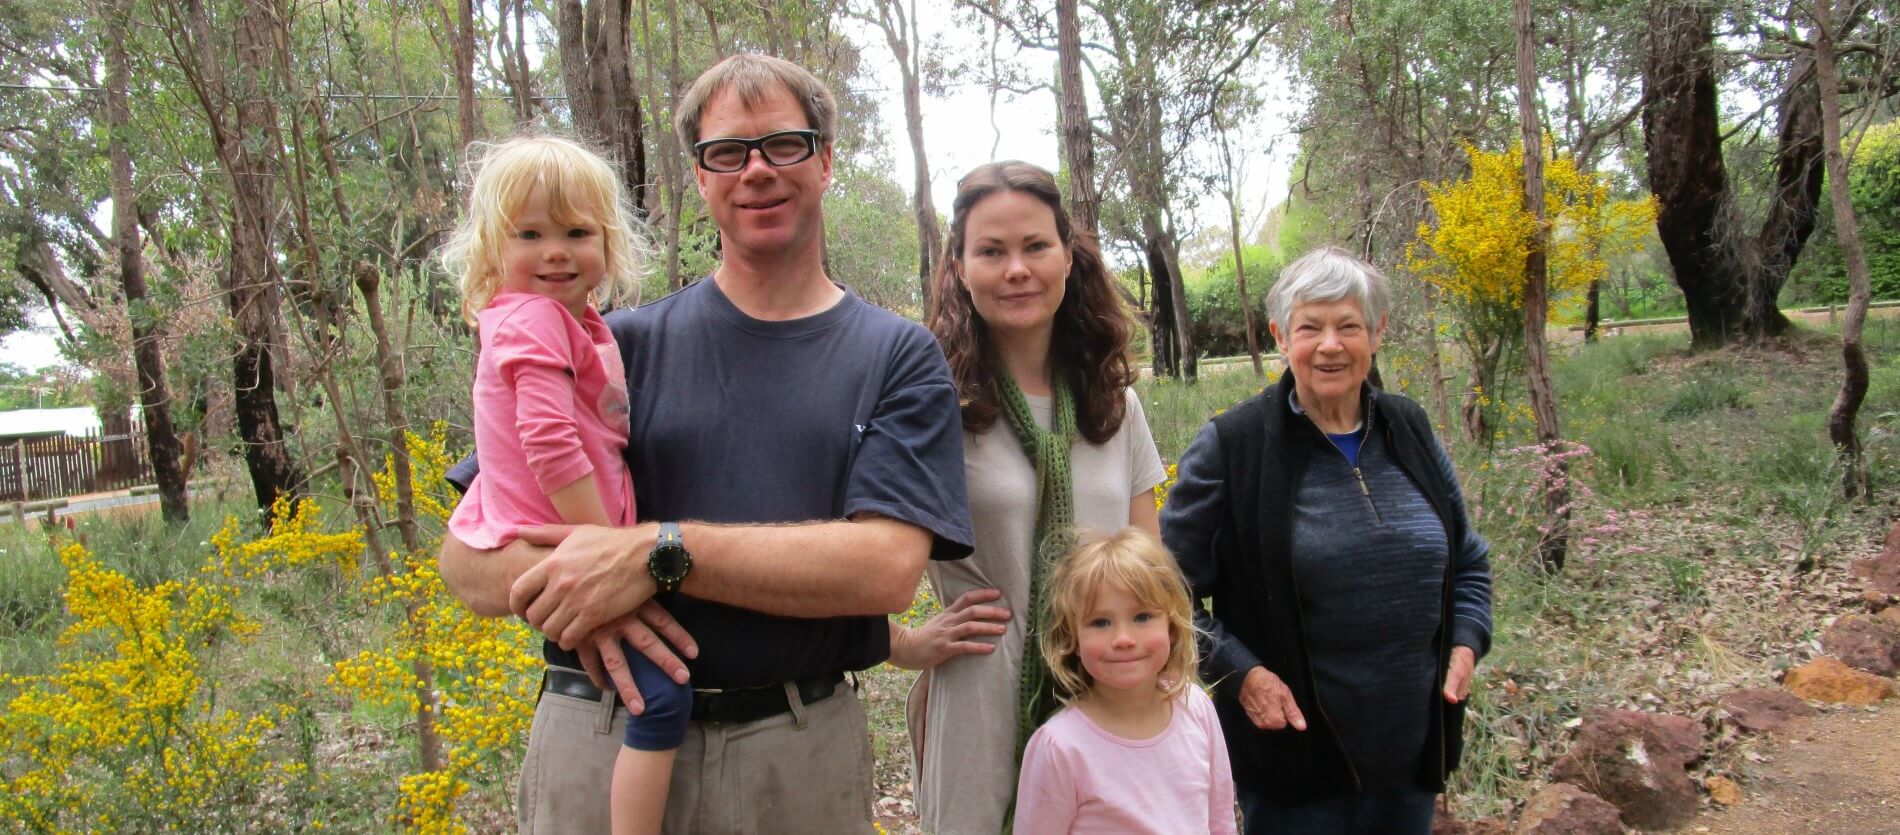 Mum, Dad, two children and Grandma during a workday at Vernallen Reserve